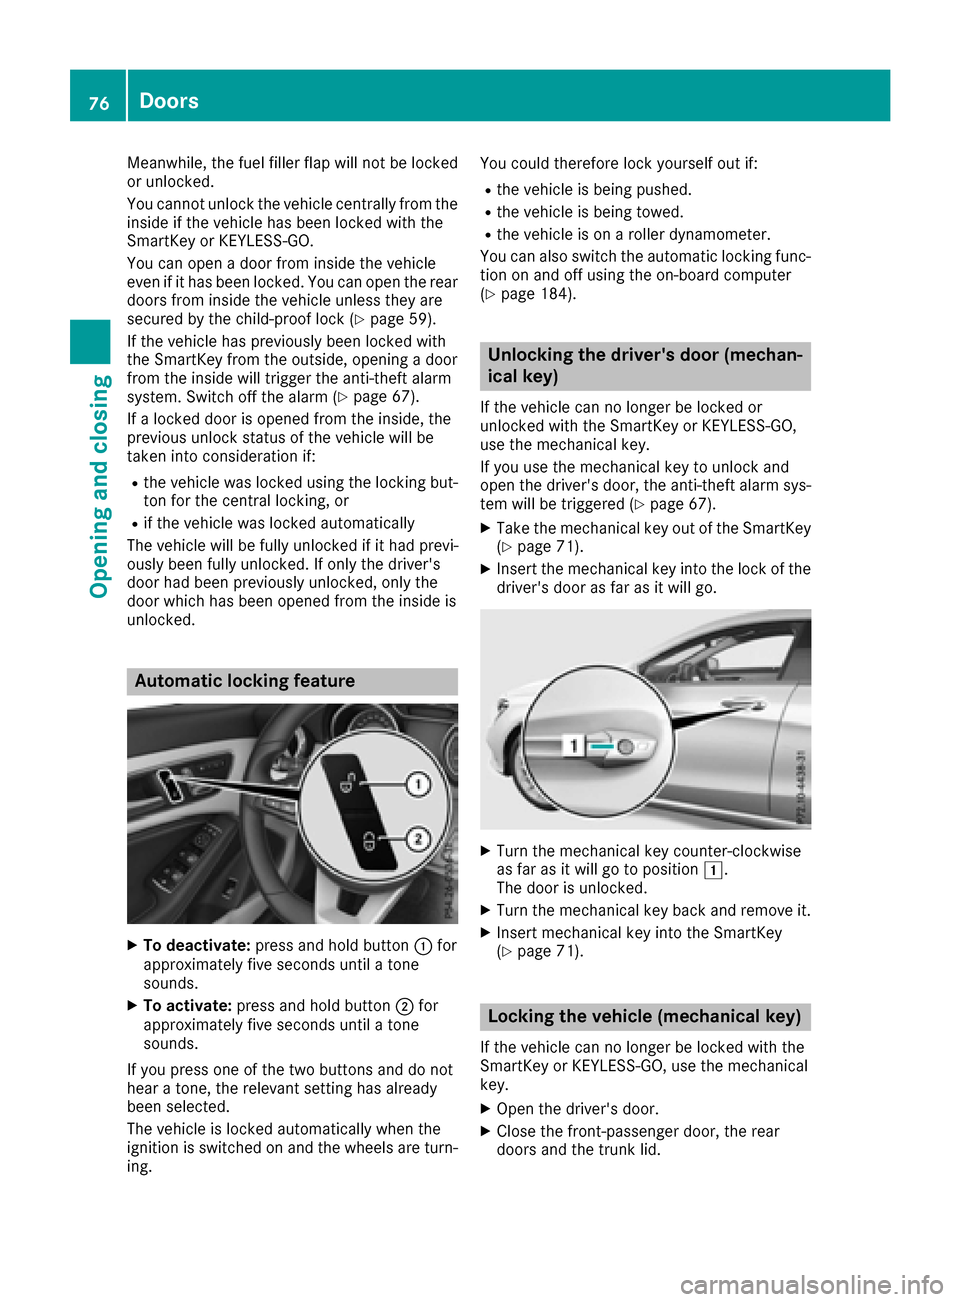 MERCEDES-BENZ CLA-Class 2017 C117 User Guide Meanwhile, the fuel filler flap will not be locked
or unlocked.
You cannot unlock the vehicle centrally from the
inside if the vehicle has been locked with the
SmartKey or KEYLESS-GO.
You can open a d